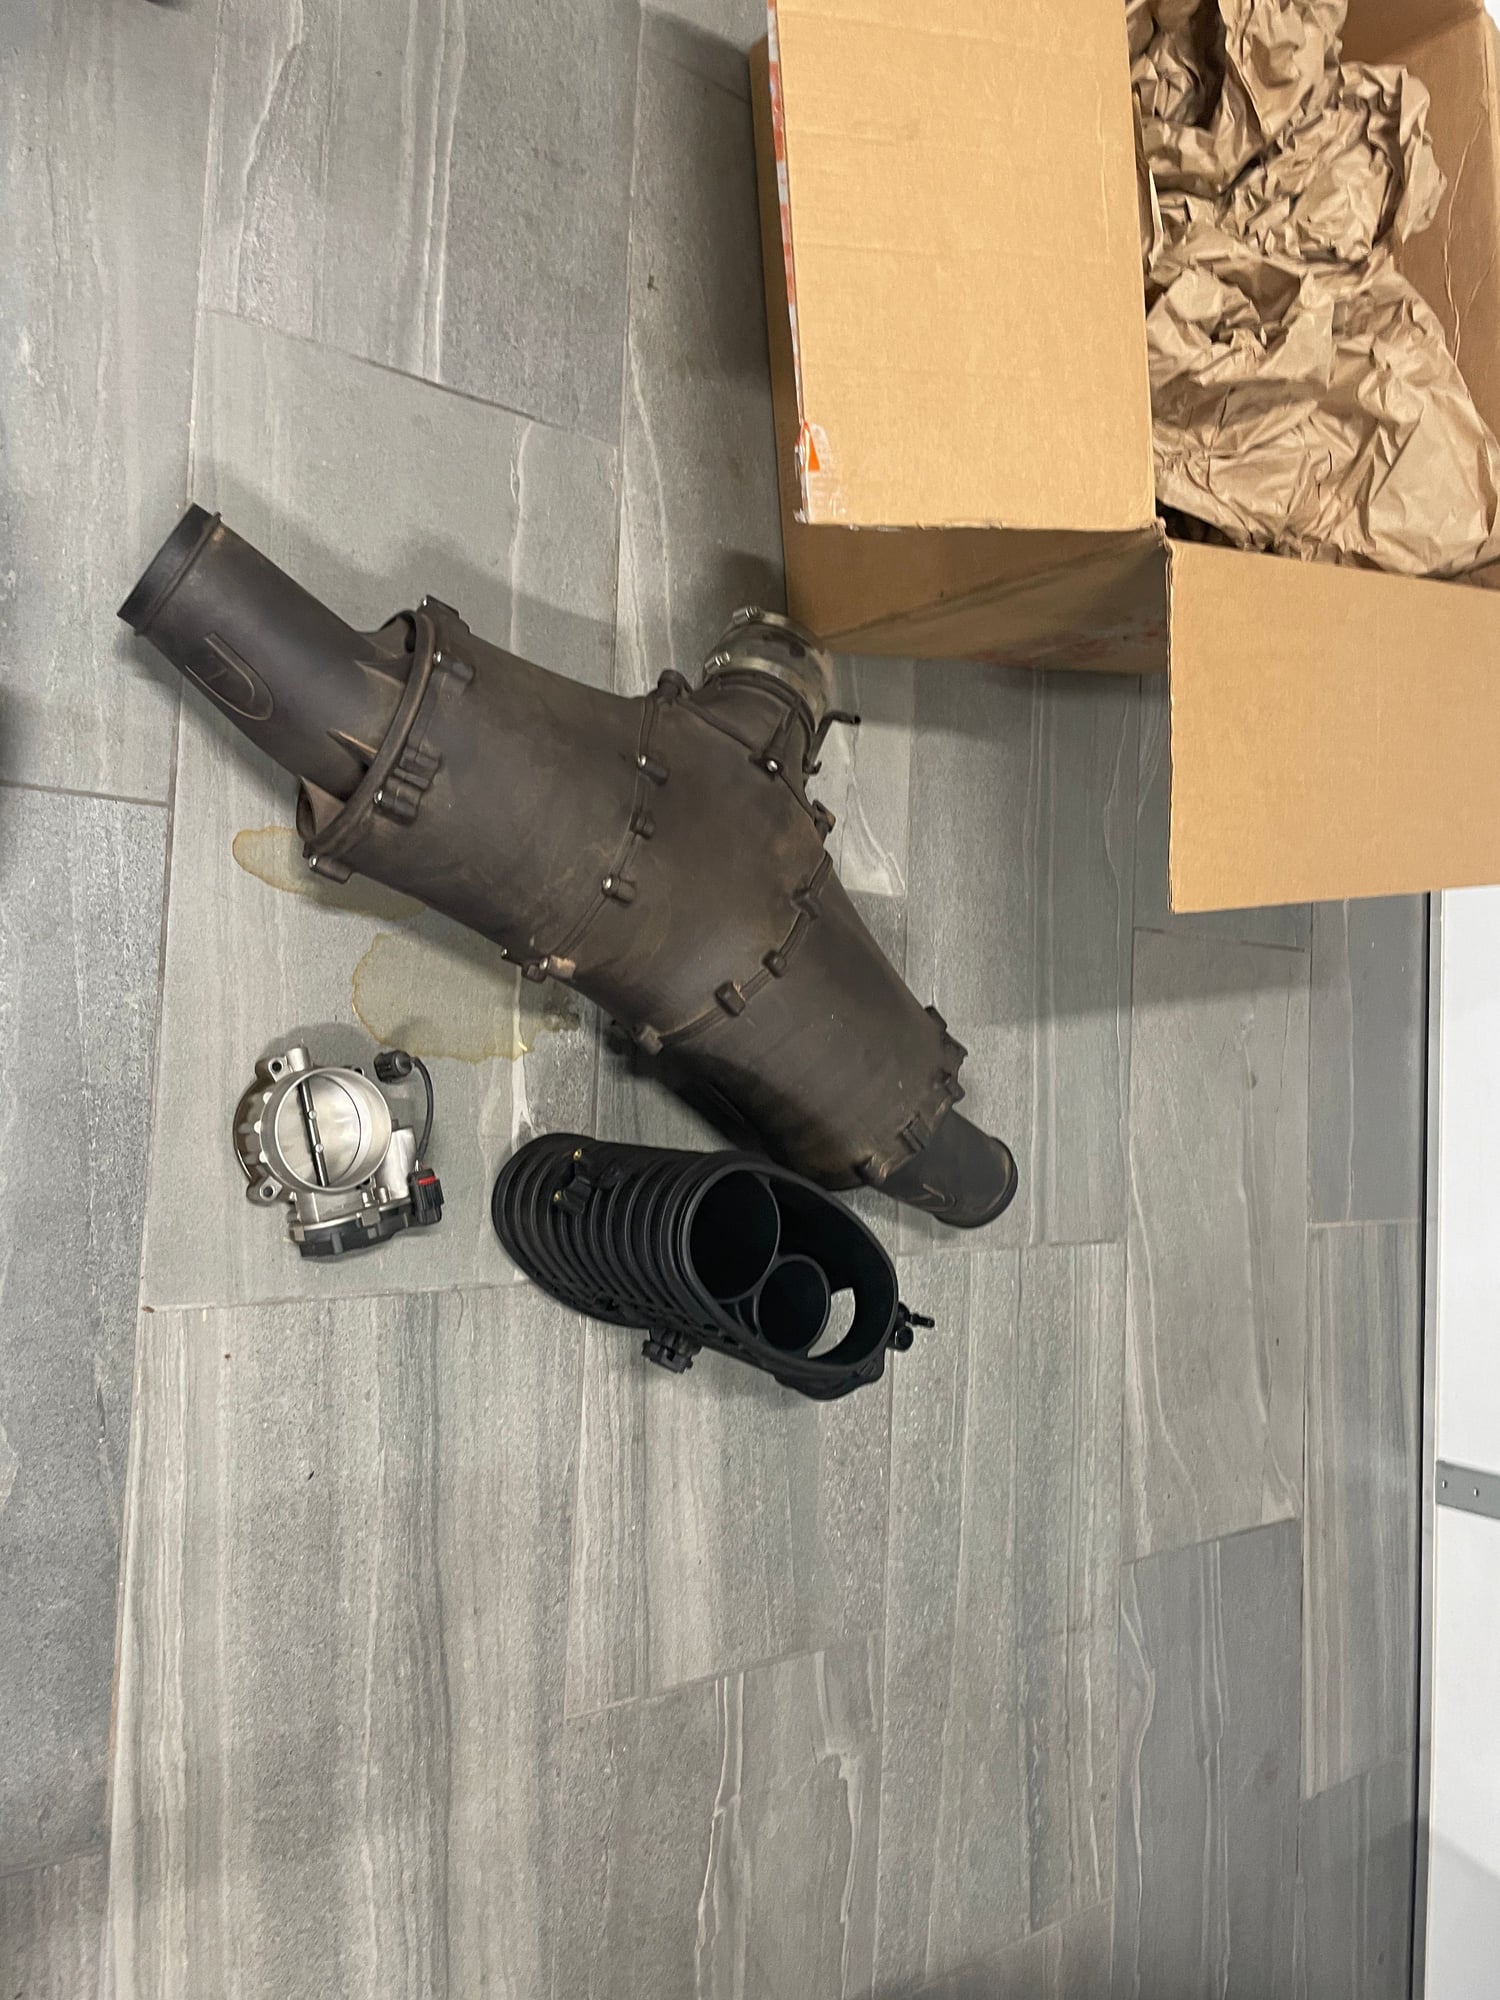 Engine - Exhaust - Dundon Full Exhaust and Power Kit - Used - 2018 to 2019 Porsche 911 - Gilbert, AZ 85297, United States